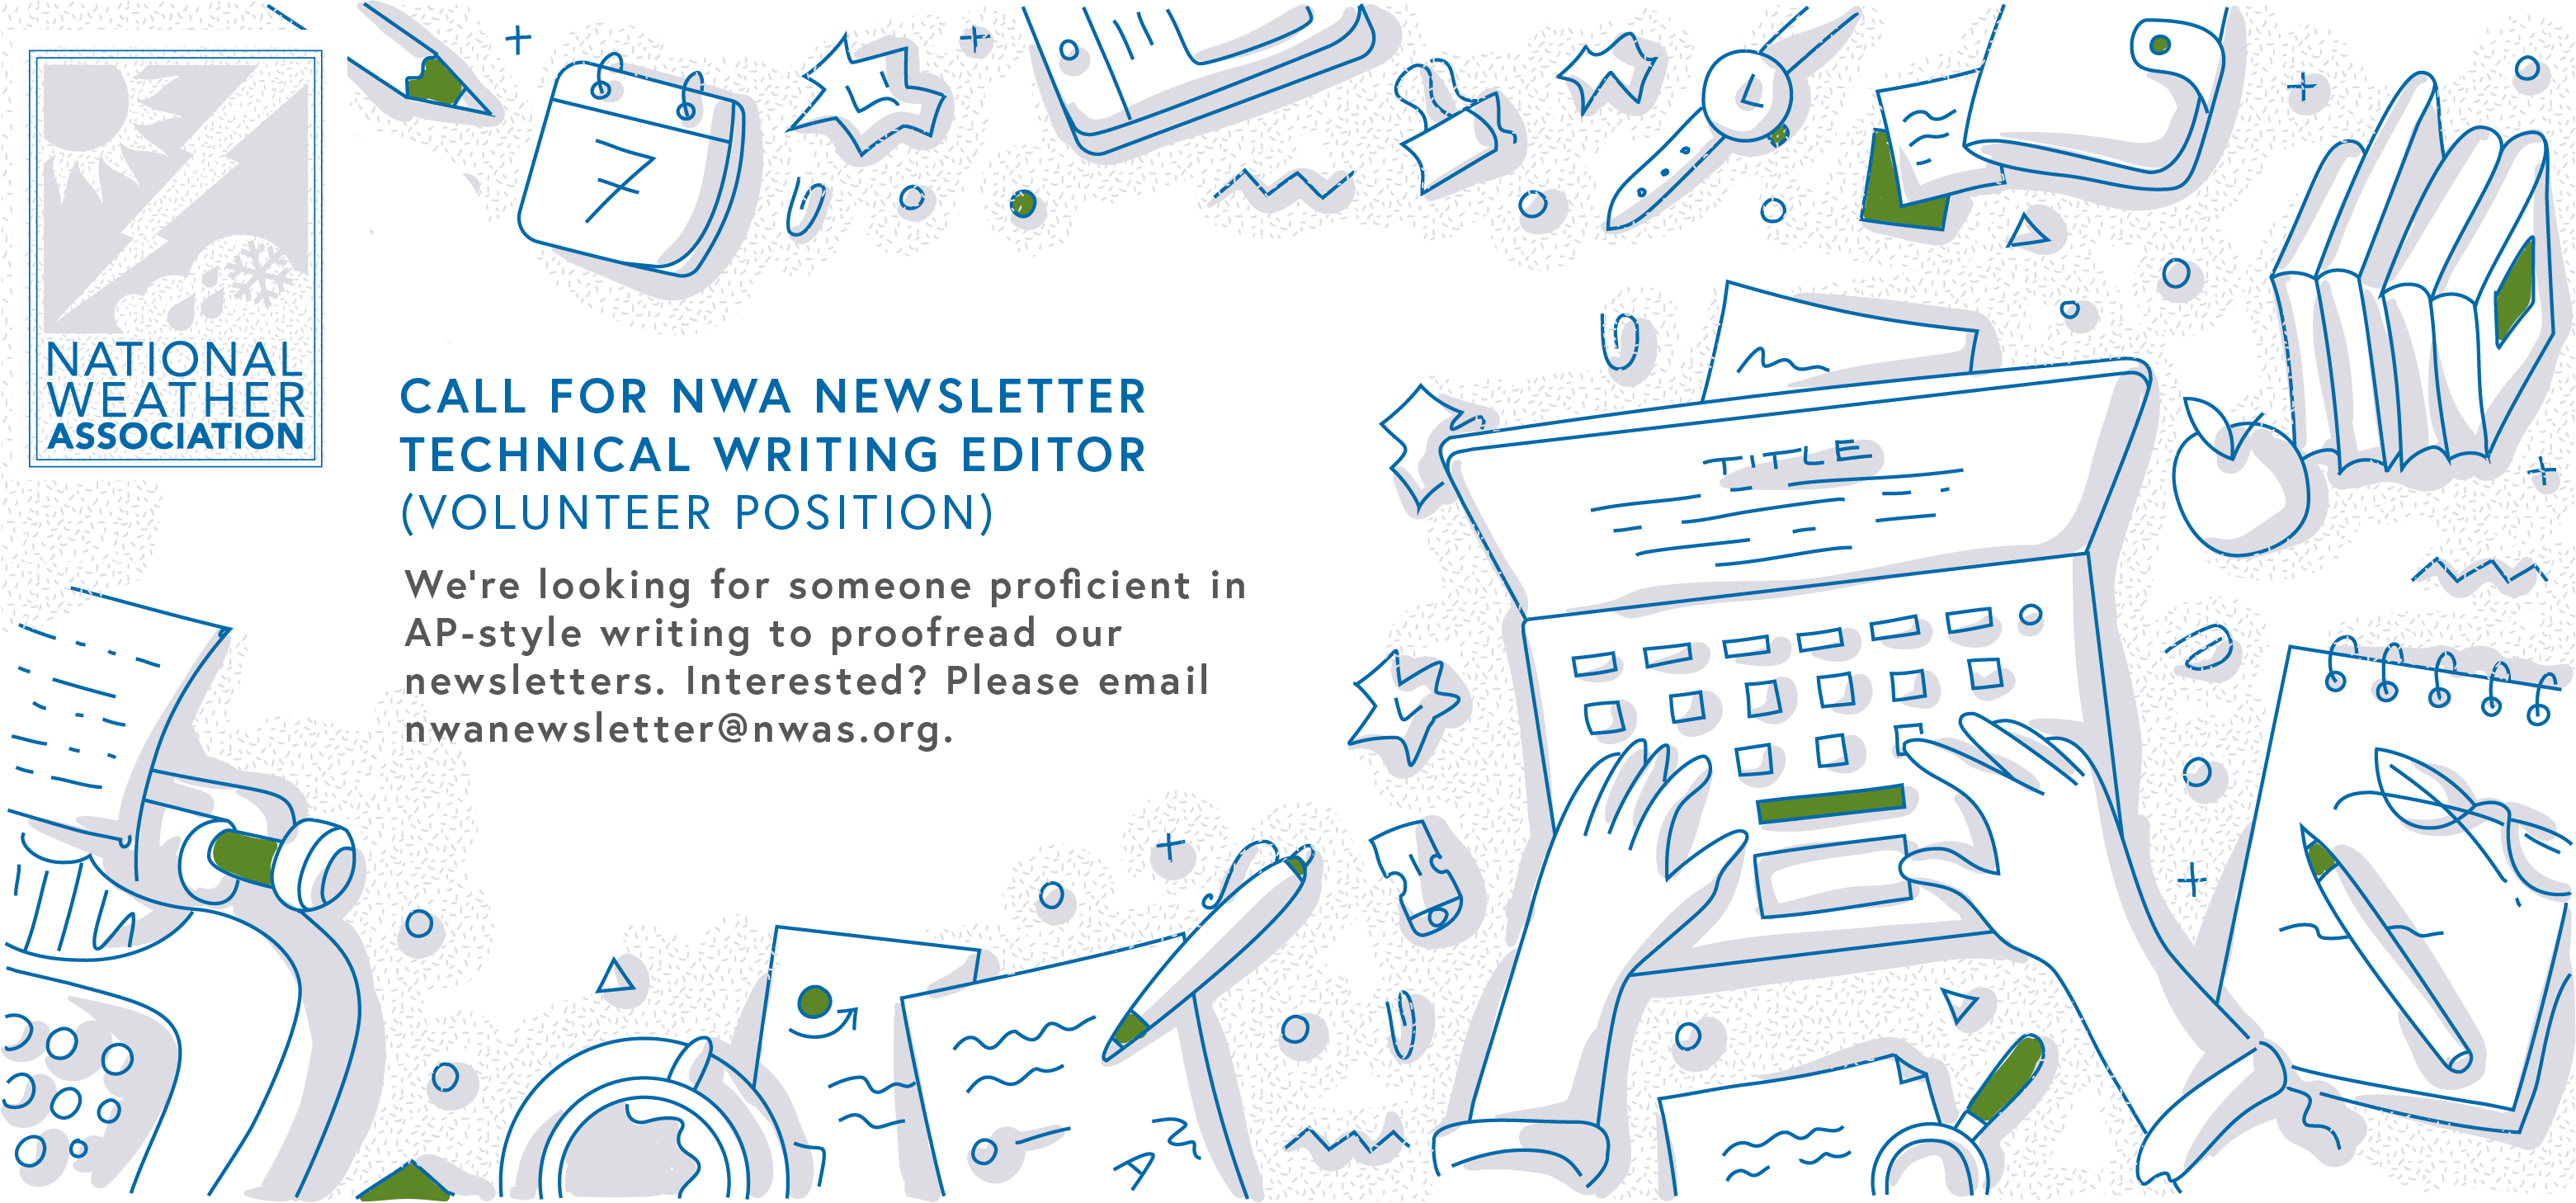 CALL FOR NWA NEWSLETTER TECHNICAL WRITING EDITOR (VOLUNTEER POSITION) We're looking for someone proficient in AP-style writing to proofread our newsletters. Interested? Please email nwanewsletter@nwas.org.